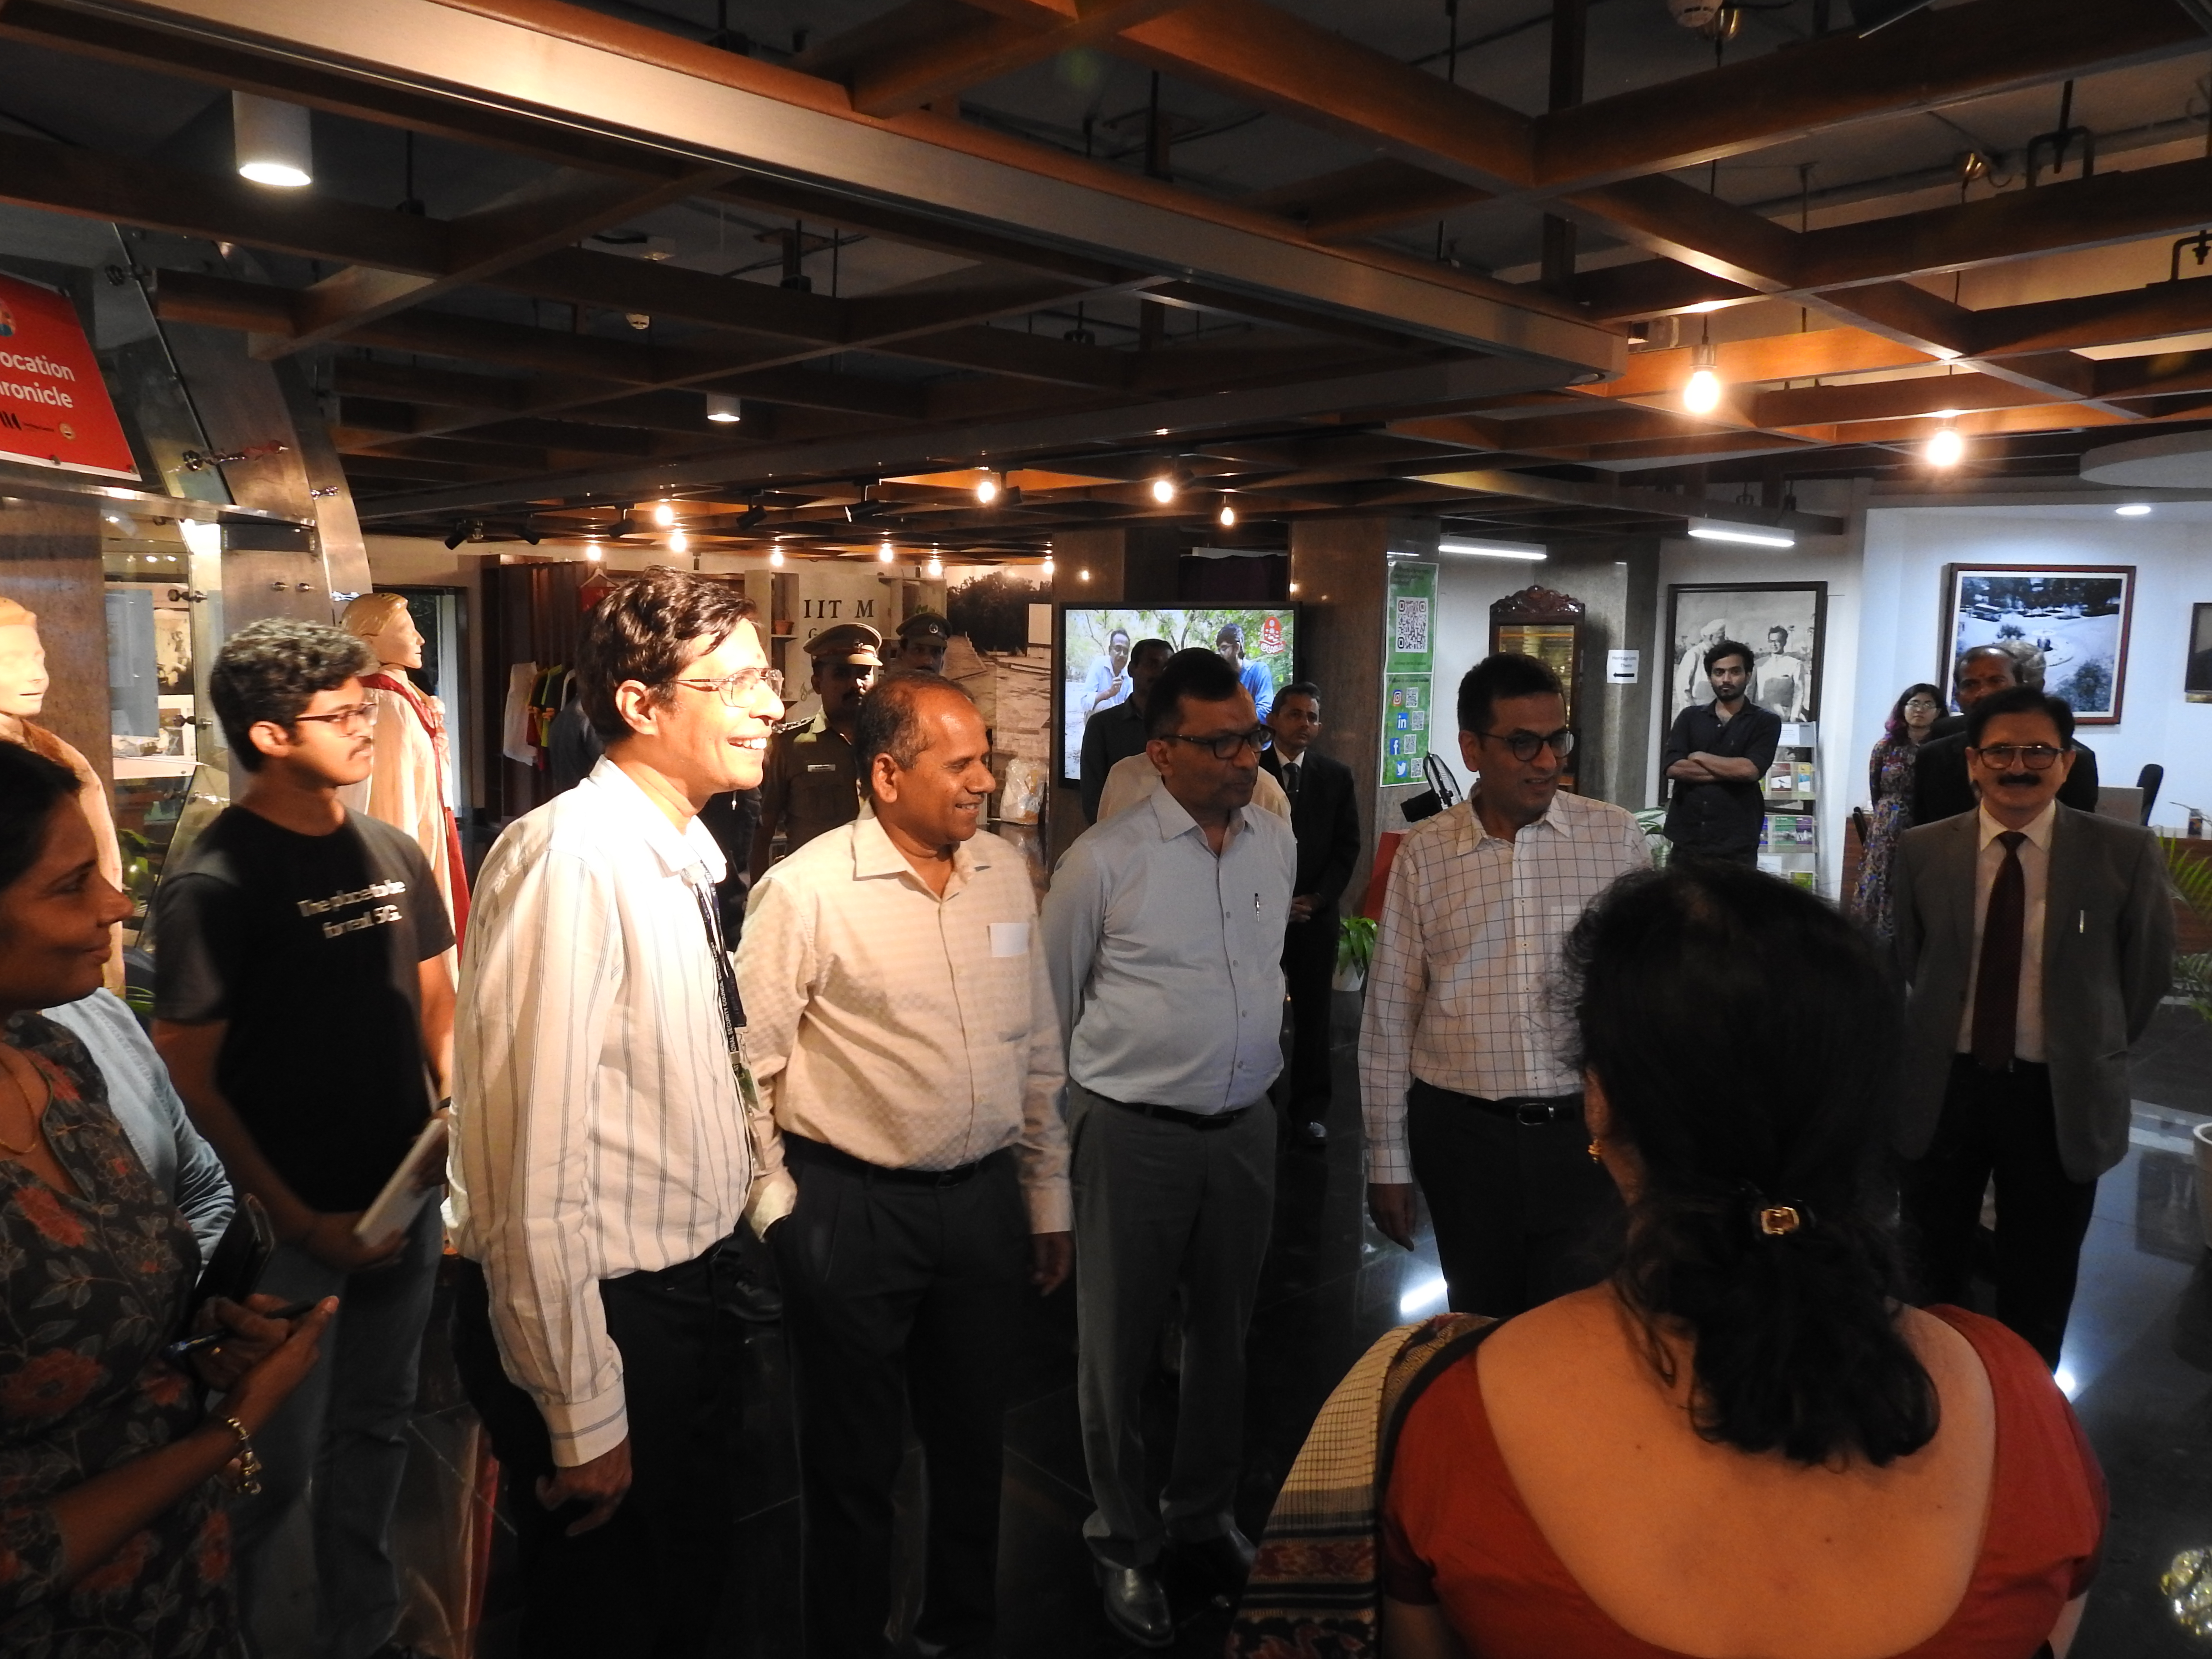 Chief Justice of India Dhananjaya Y. Chandrachud at the Heritage Centre of IIT Madras